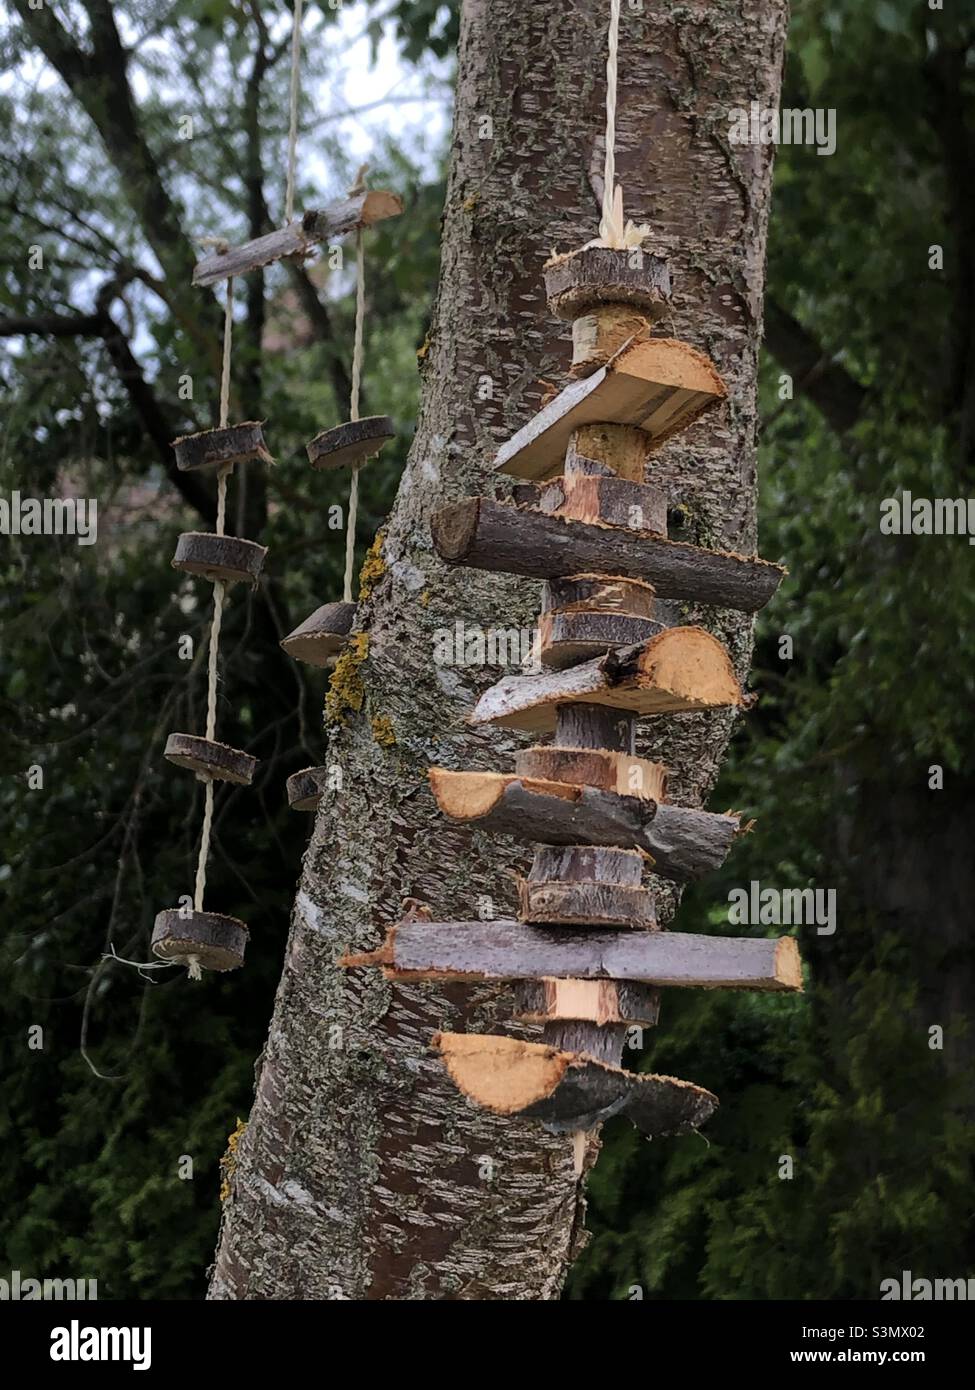 Wooden Wind Chime - DIY Stock Photo